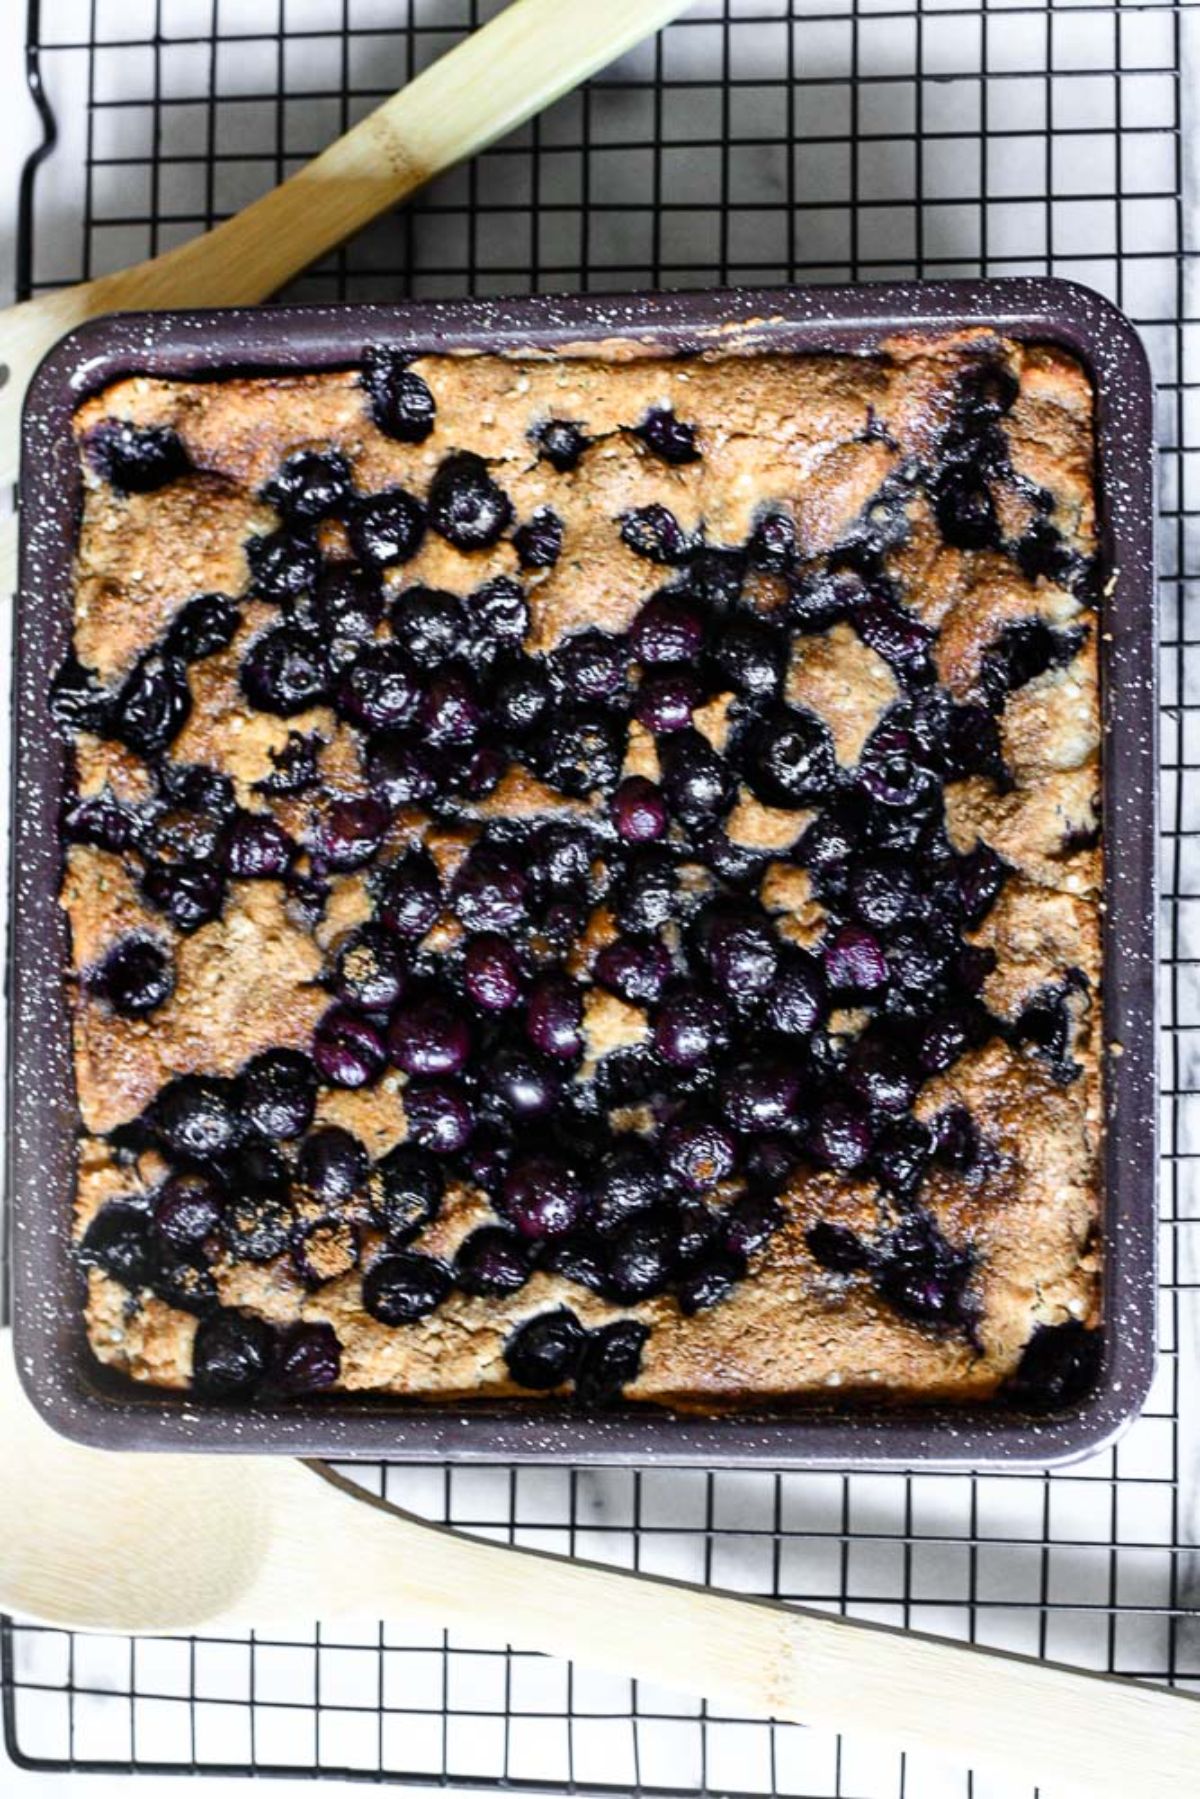 Delicious Paleo Blueberry Cobbler on a resting grid.